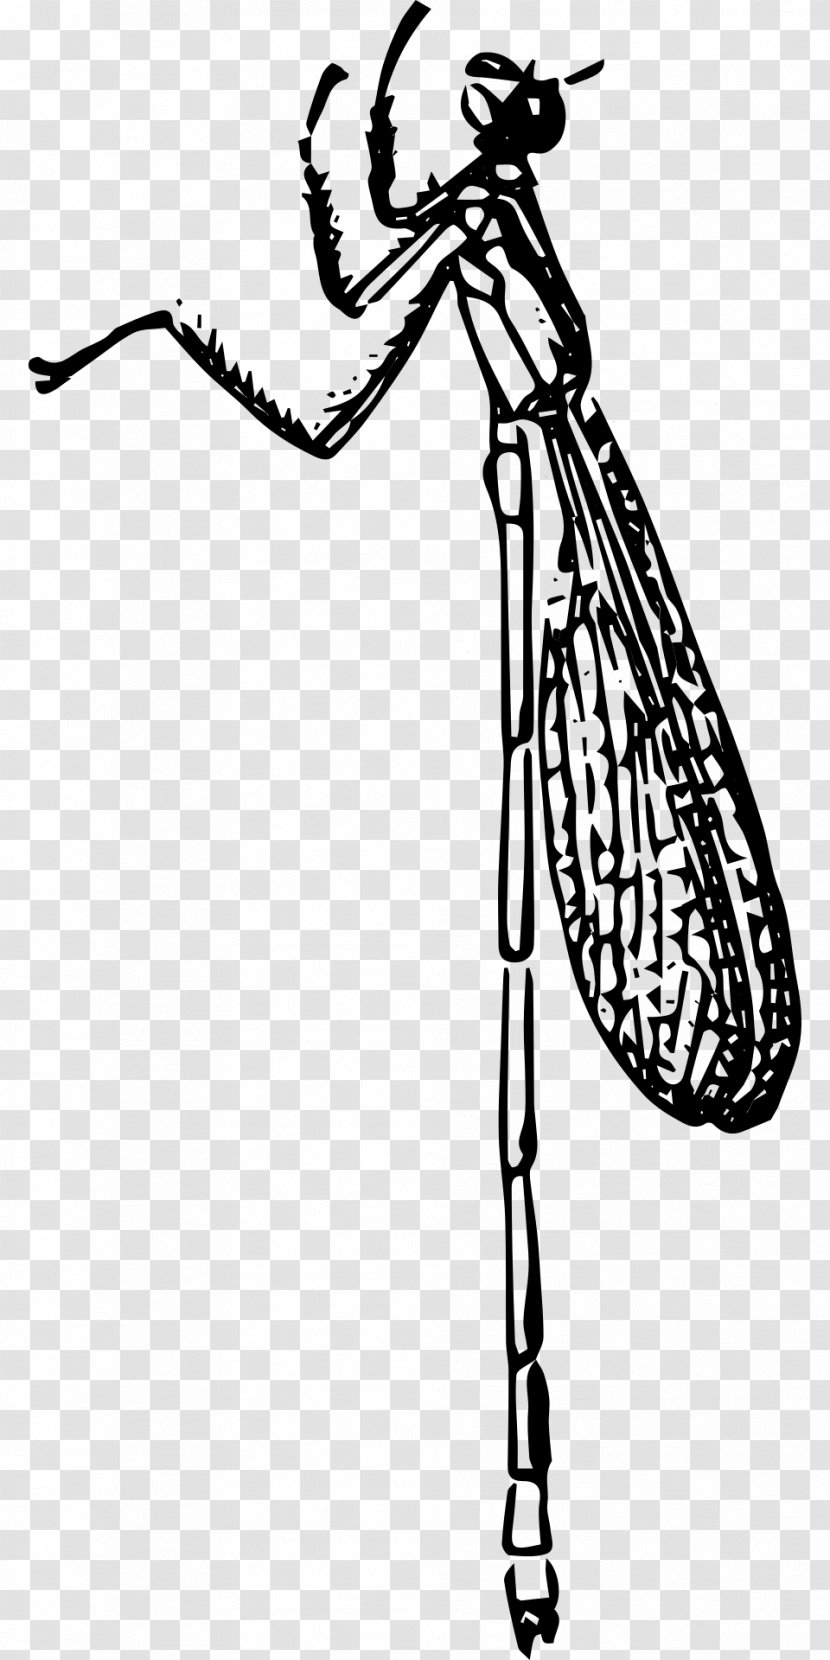 Large Red Damselfly Beetle Clip Art - Monochrome Transparent PNG